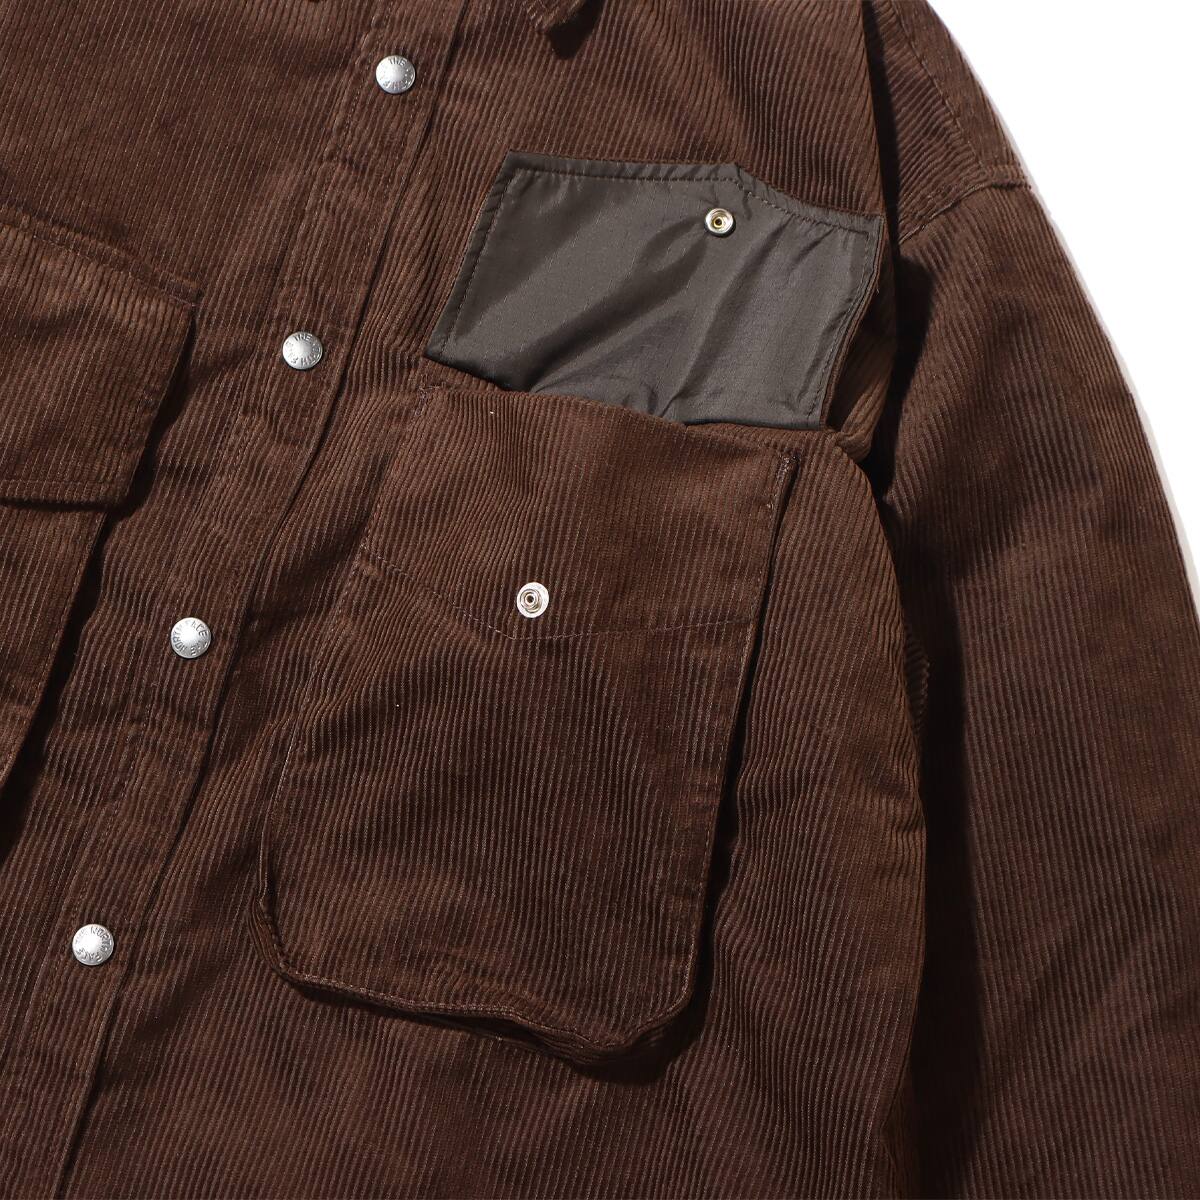 THE NORTH FACE PURPLE LABEL Corduroy Insulation Shirt Jacket Brown 